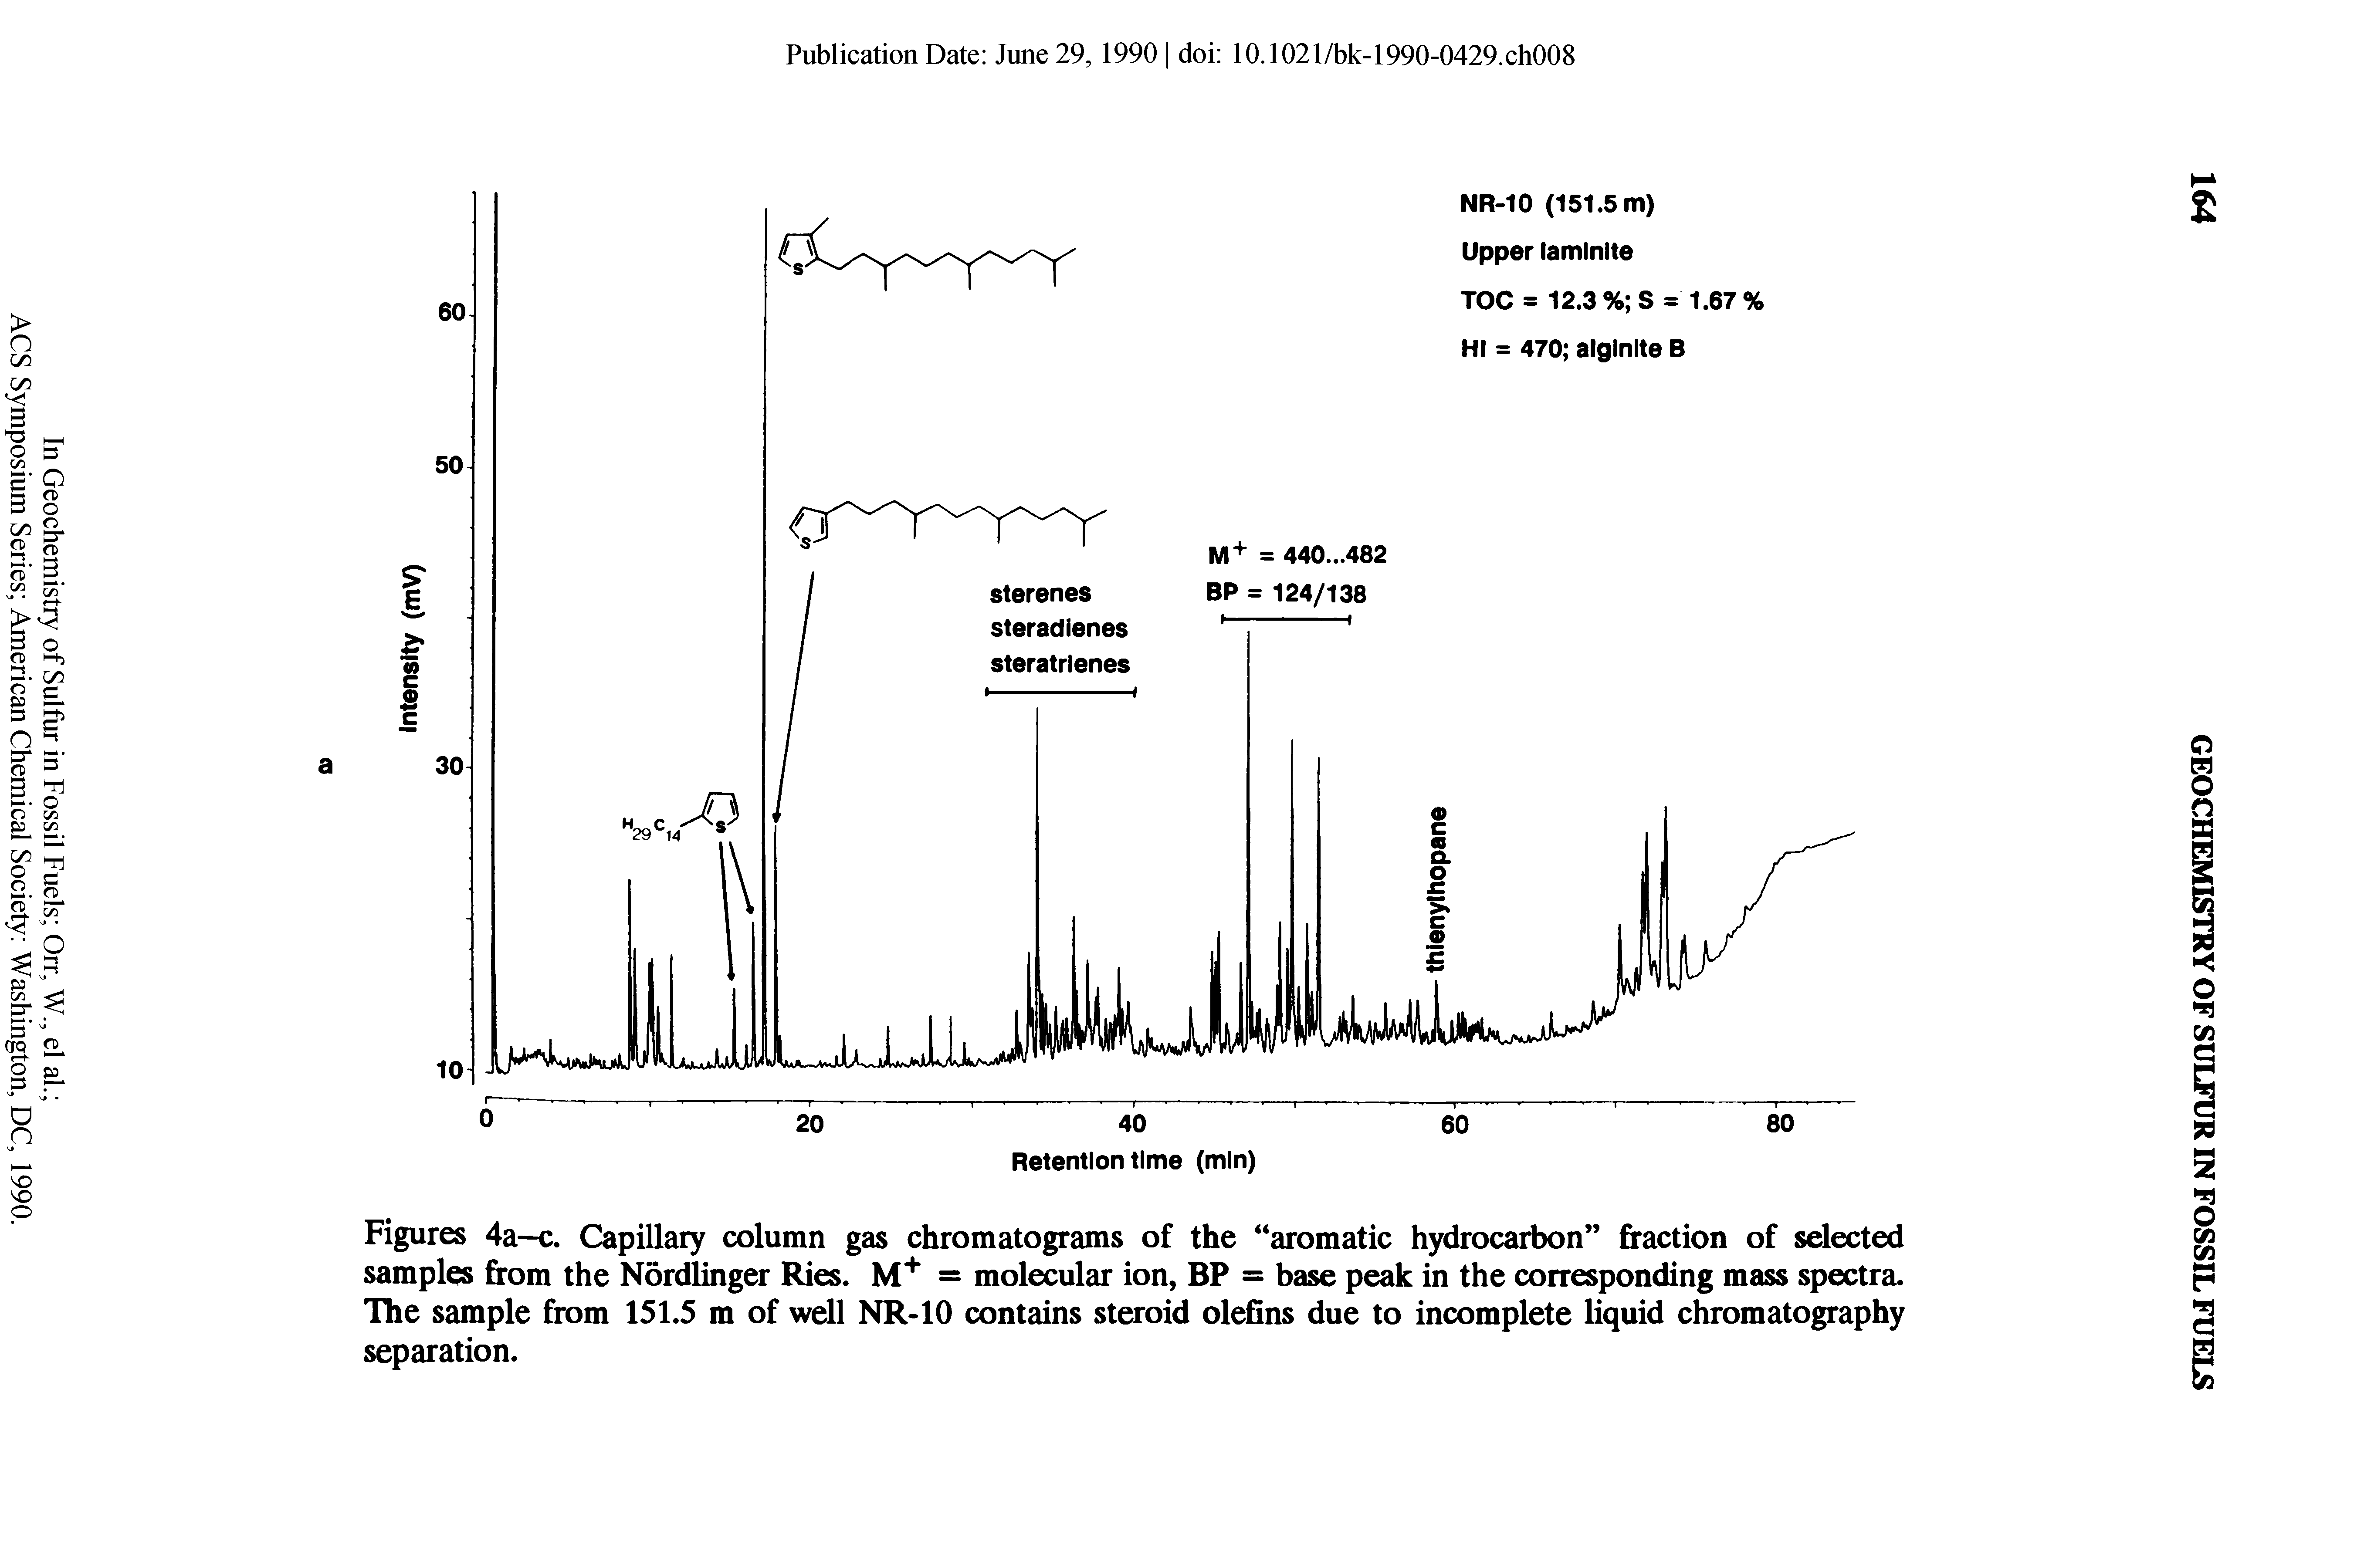 Figures 4a—c. Capillary column gas chromatograms of the aromatic hydrocarbon fraction of selected samples from the Nordlinger Ries. M+ = molecular ion, BP = base peak in the corresponding mass spectra. The sample from 151.5 m of well NR-10 contains steroid olefins due to incomplete liquid chromatography separation.